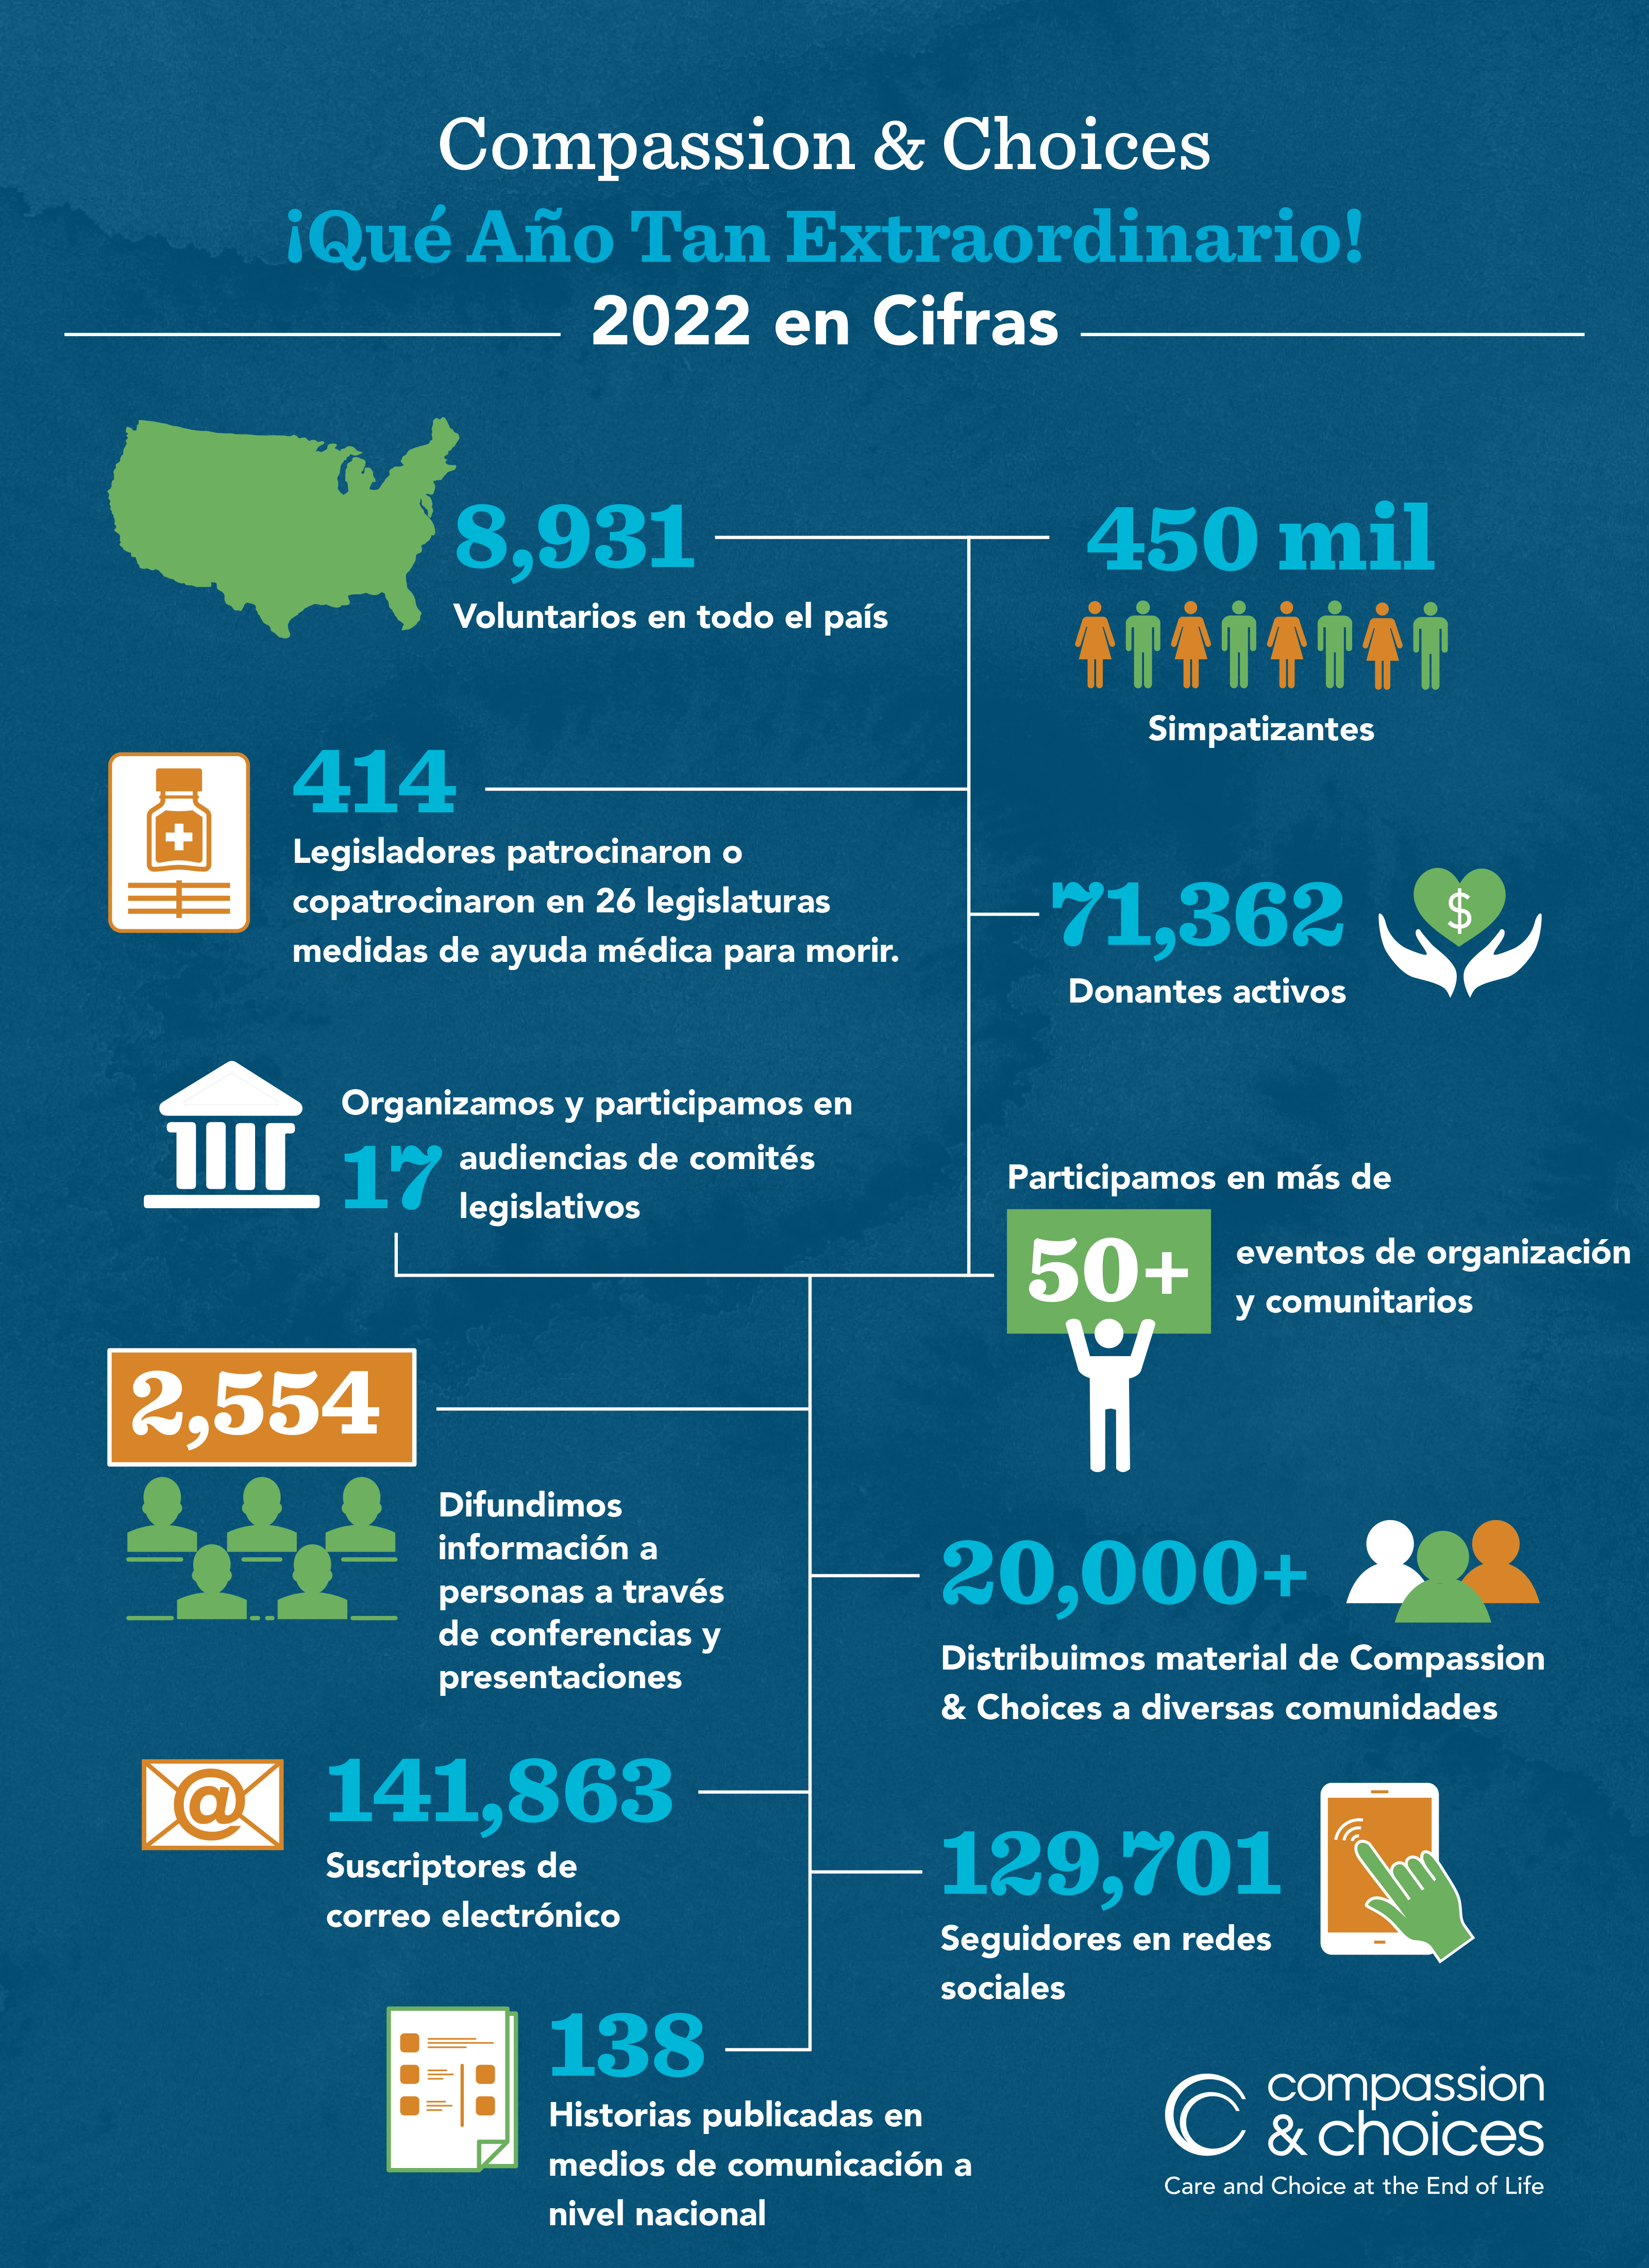 Compassion & Choices Year in Review 2022 infographic in spanish